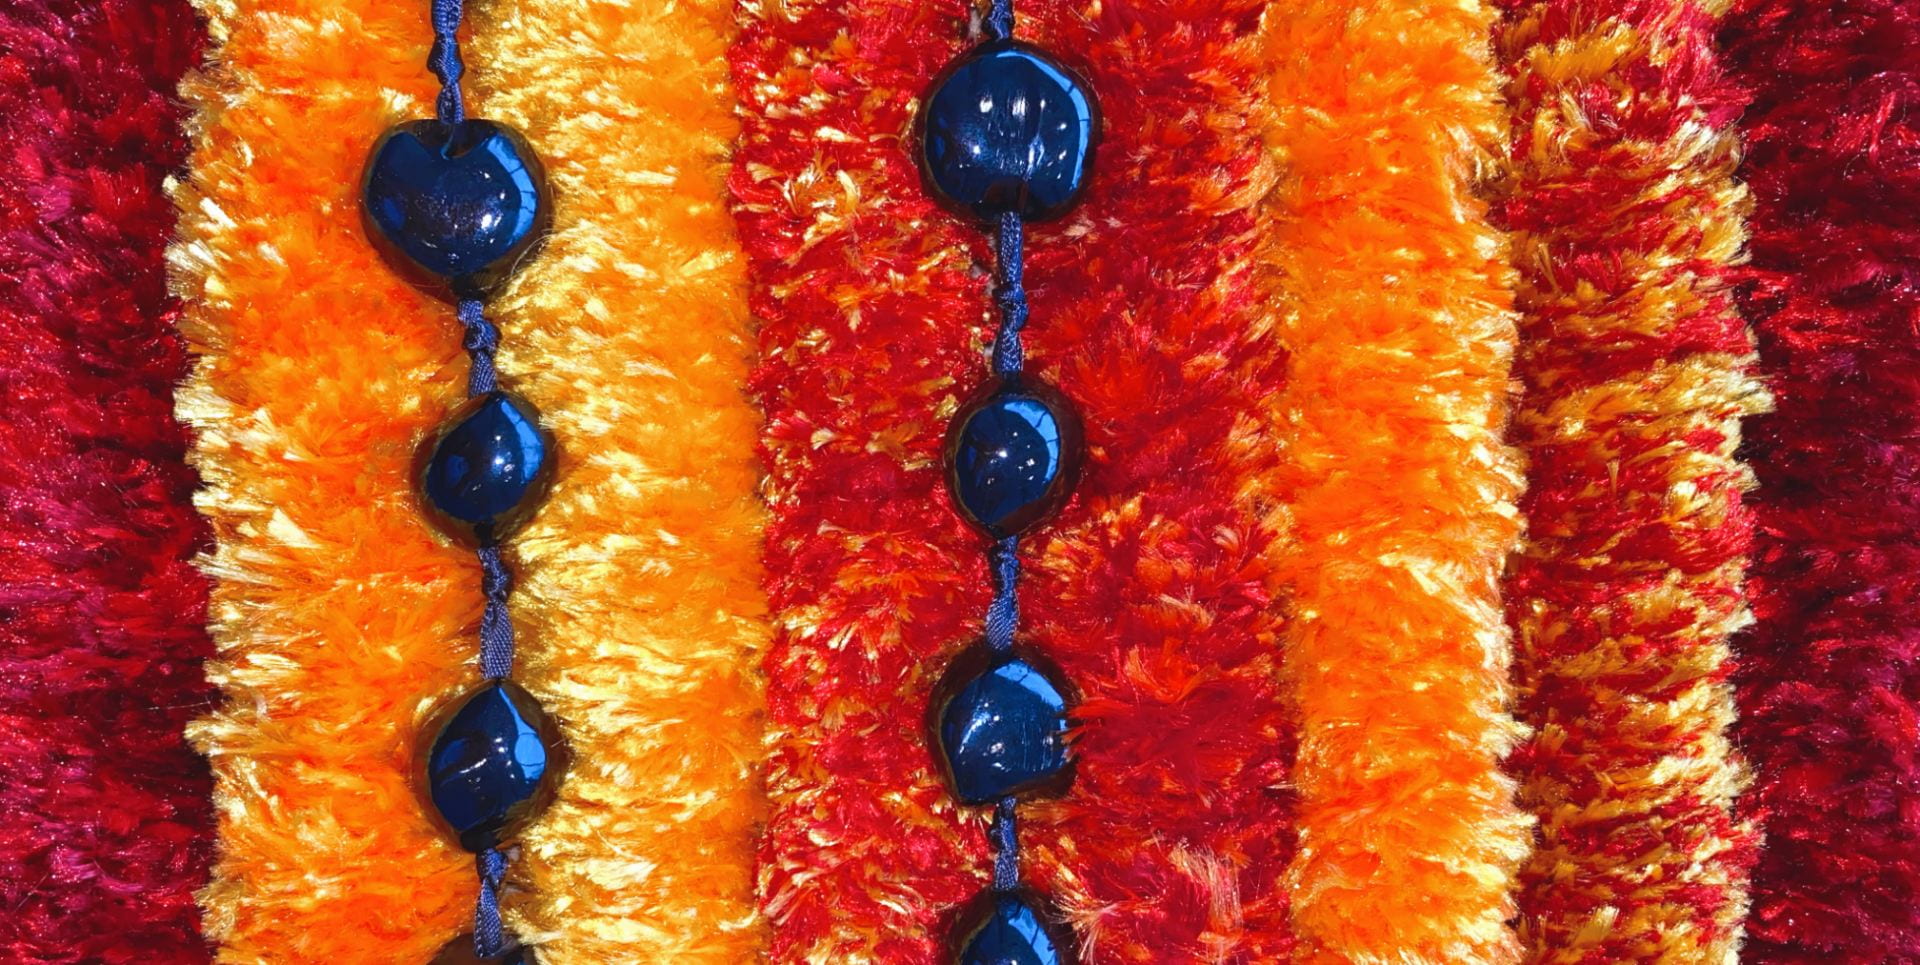 A close up photograph of yarn leis and blue beads.